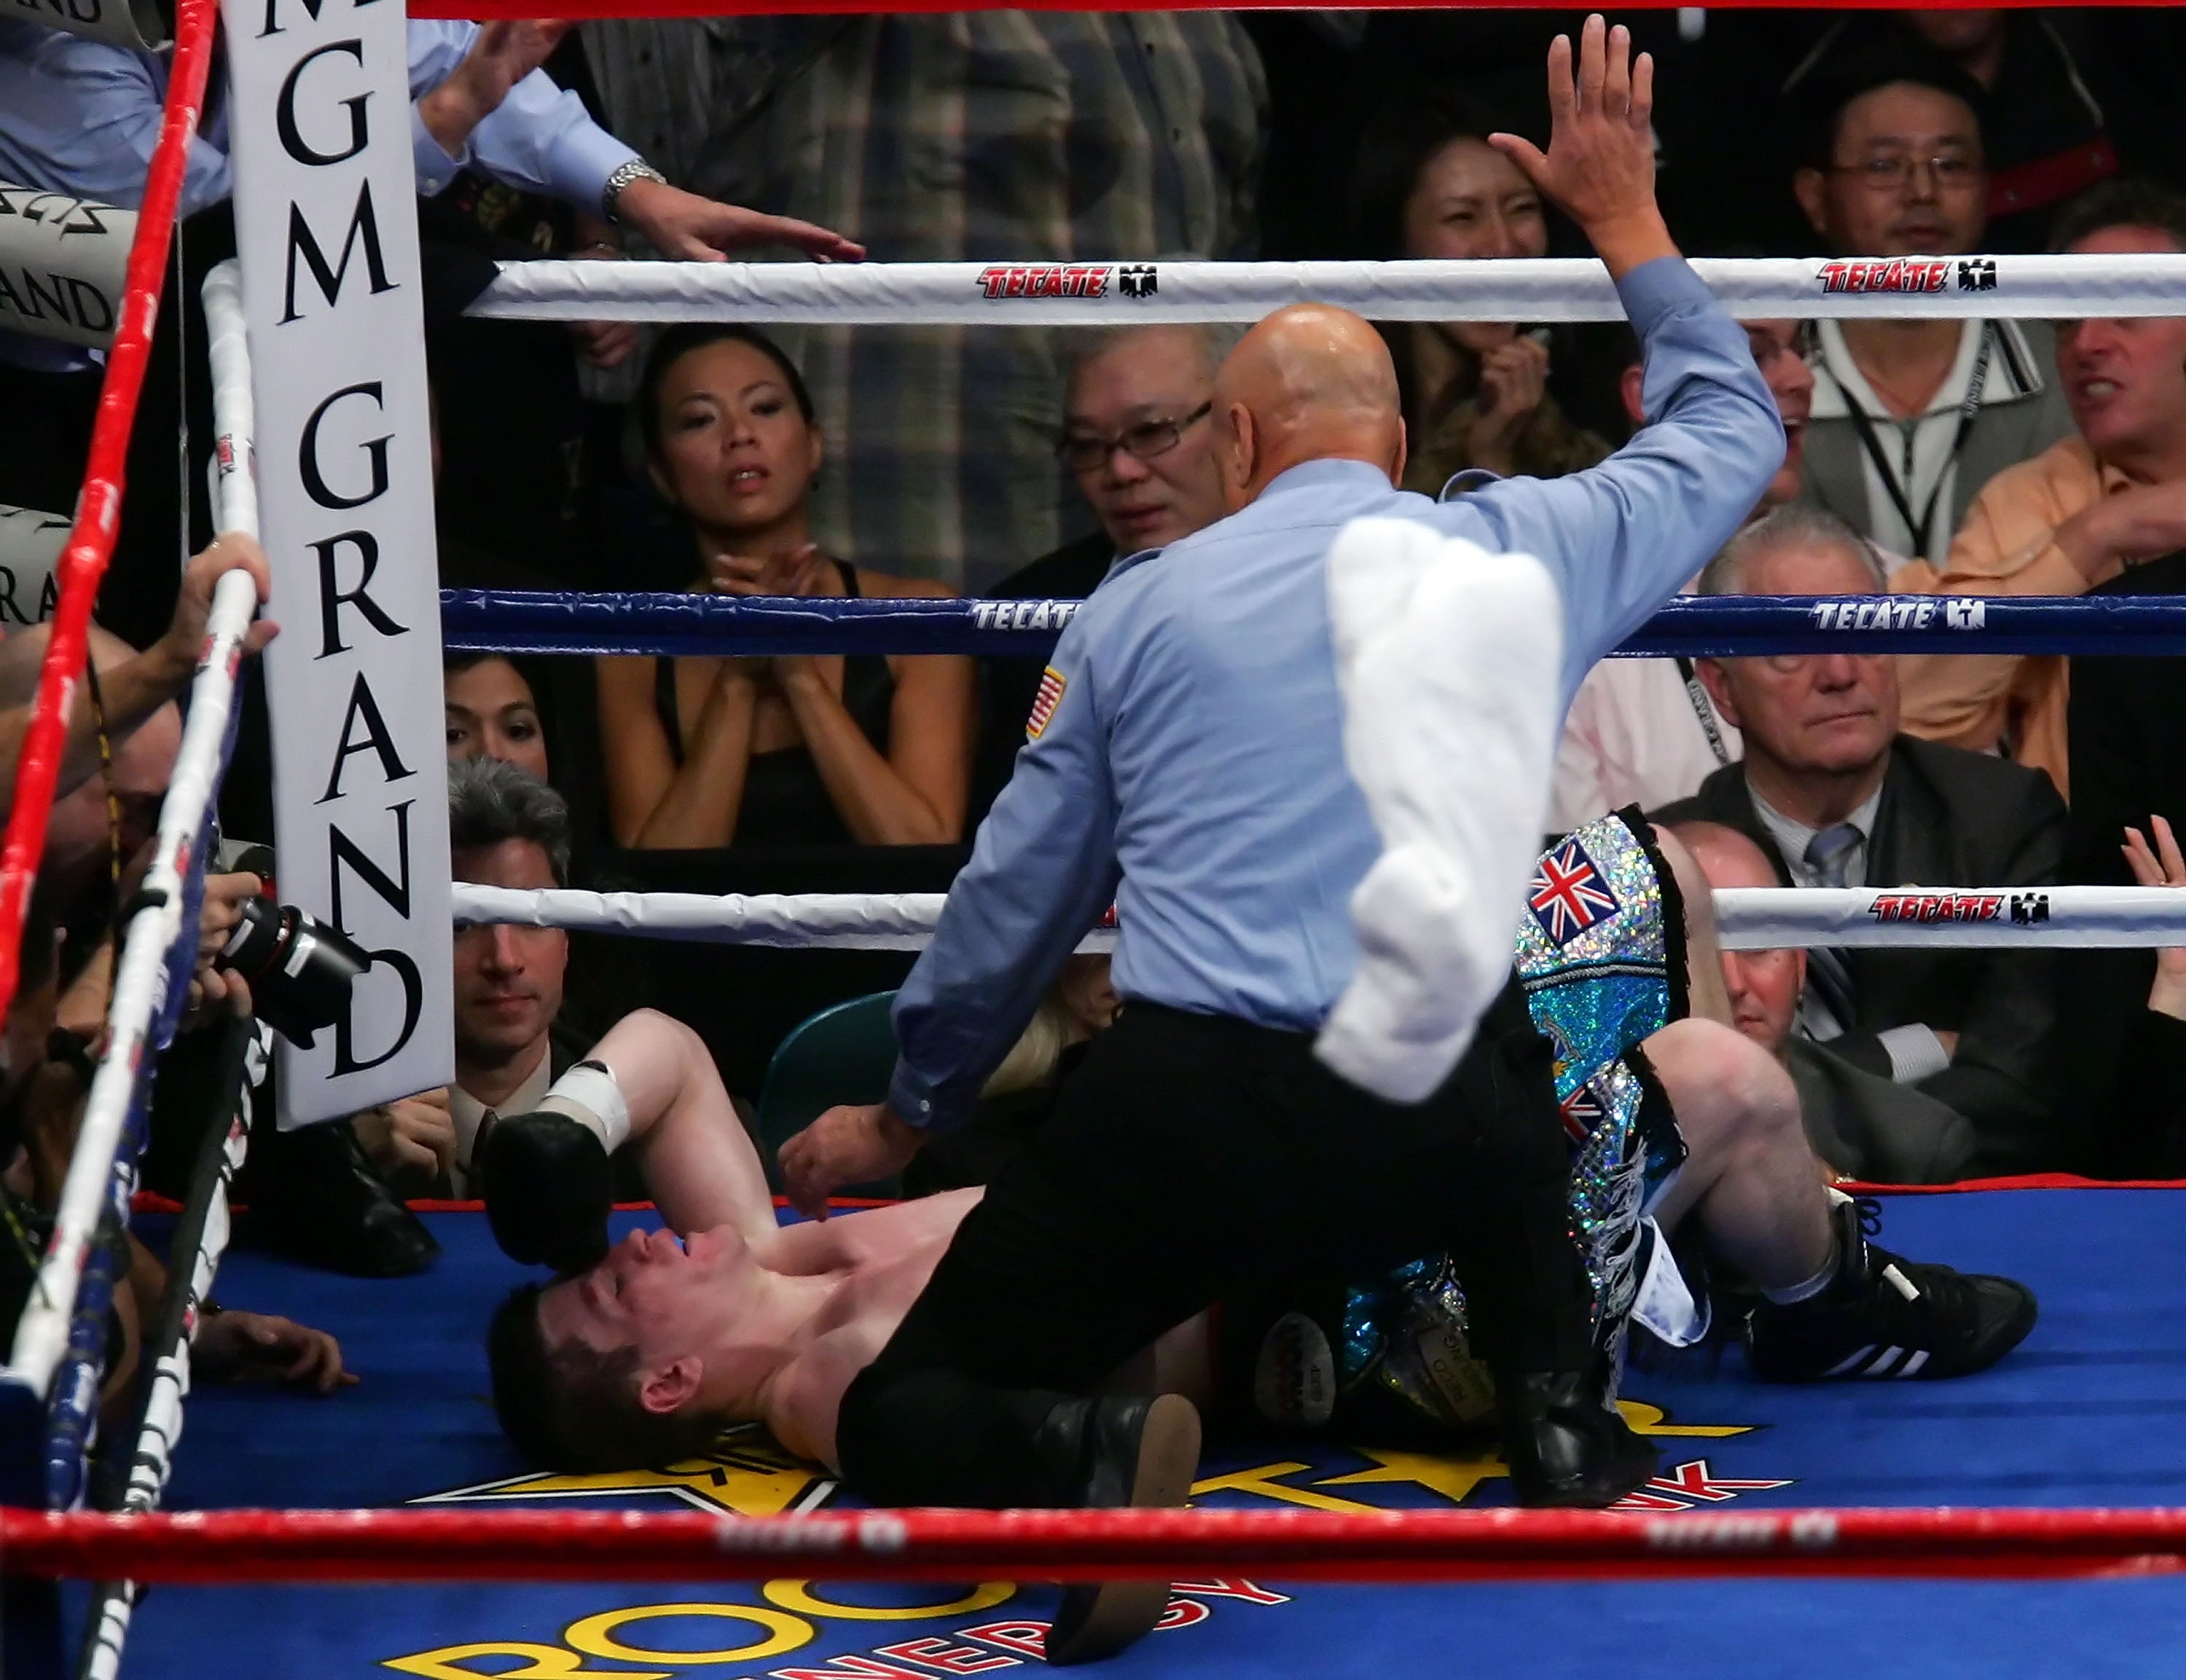 Hatton suffered a knockout loss to Floyd Mayweather in 2007